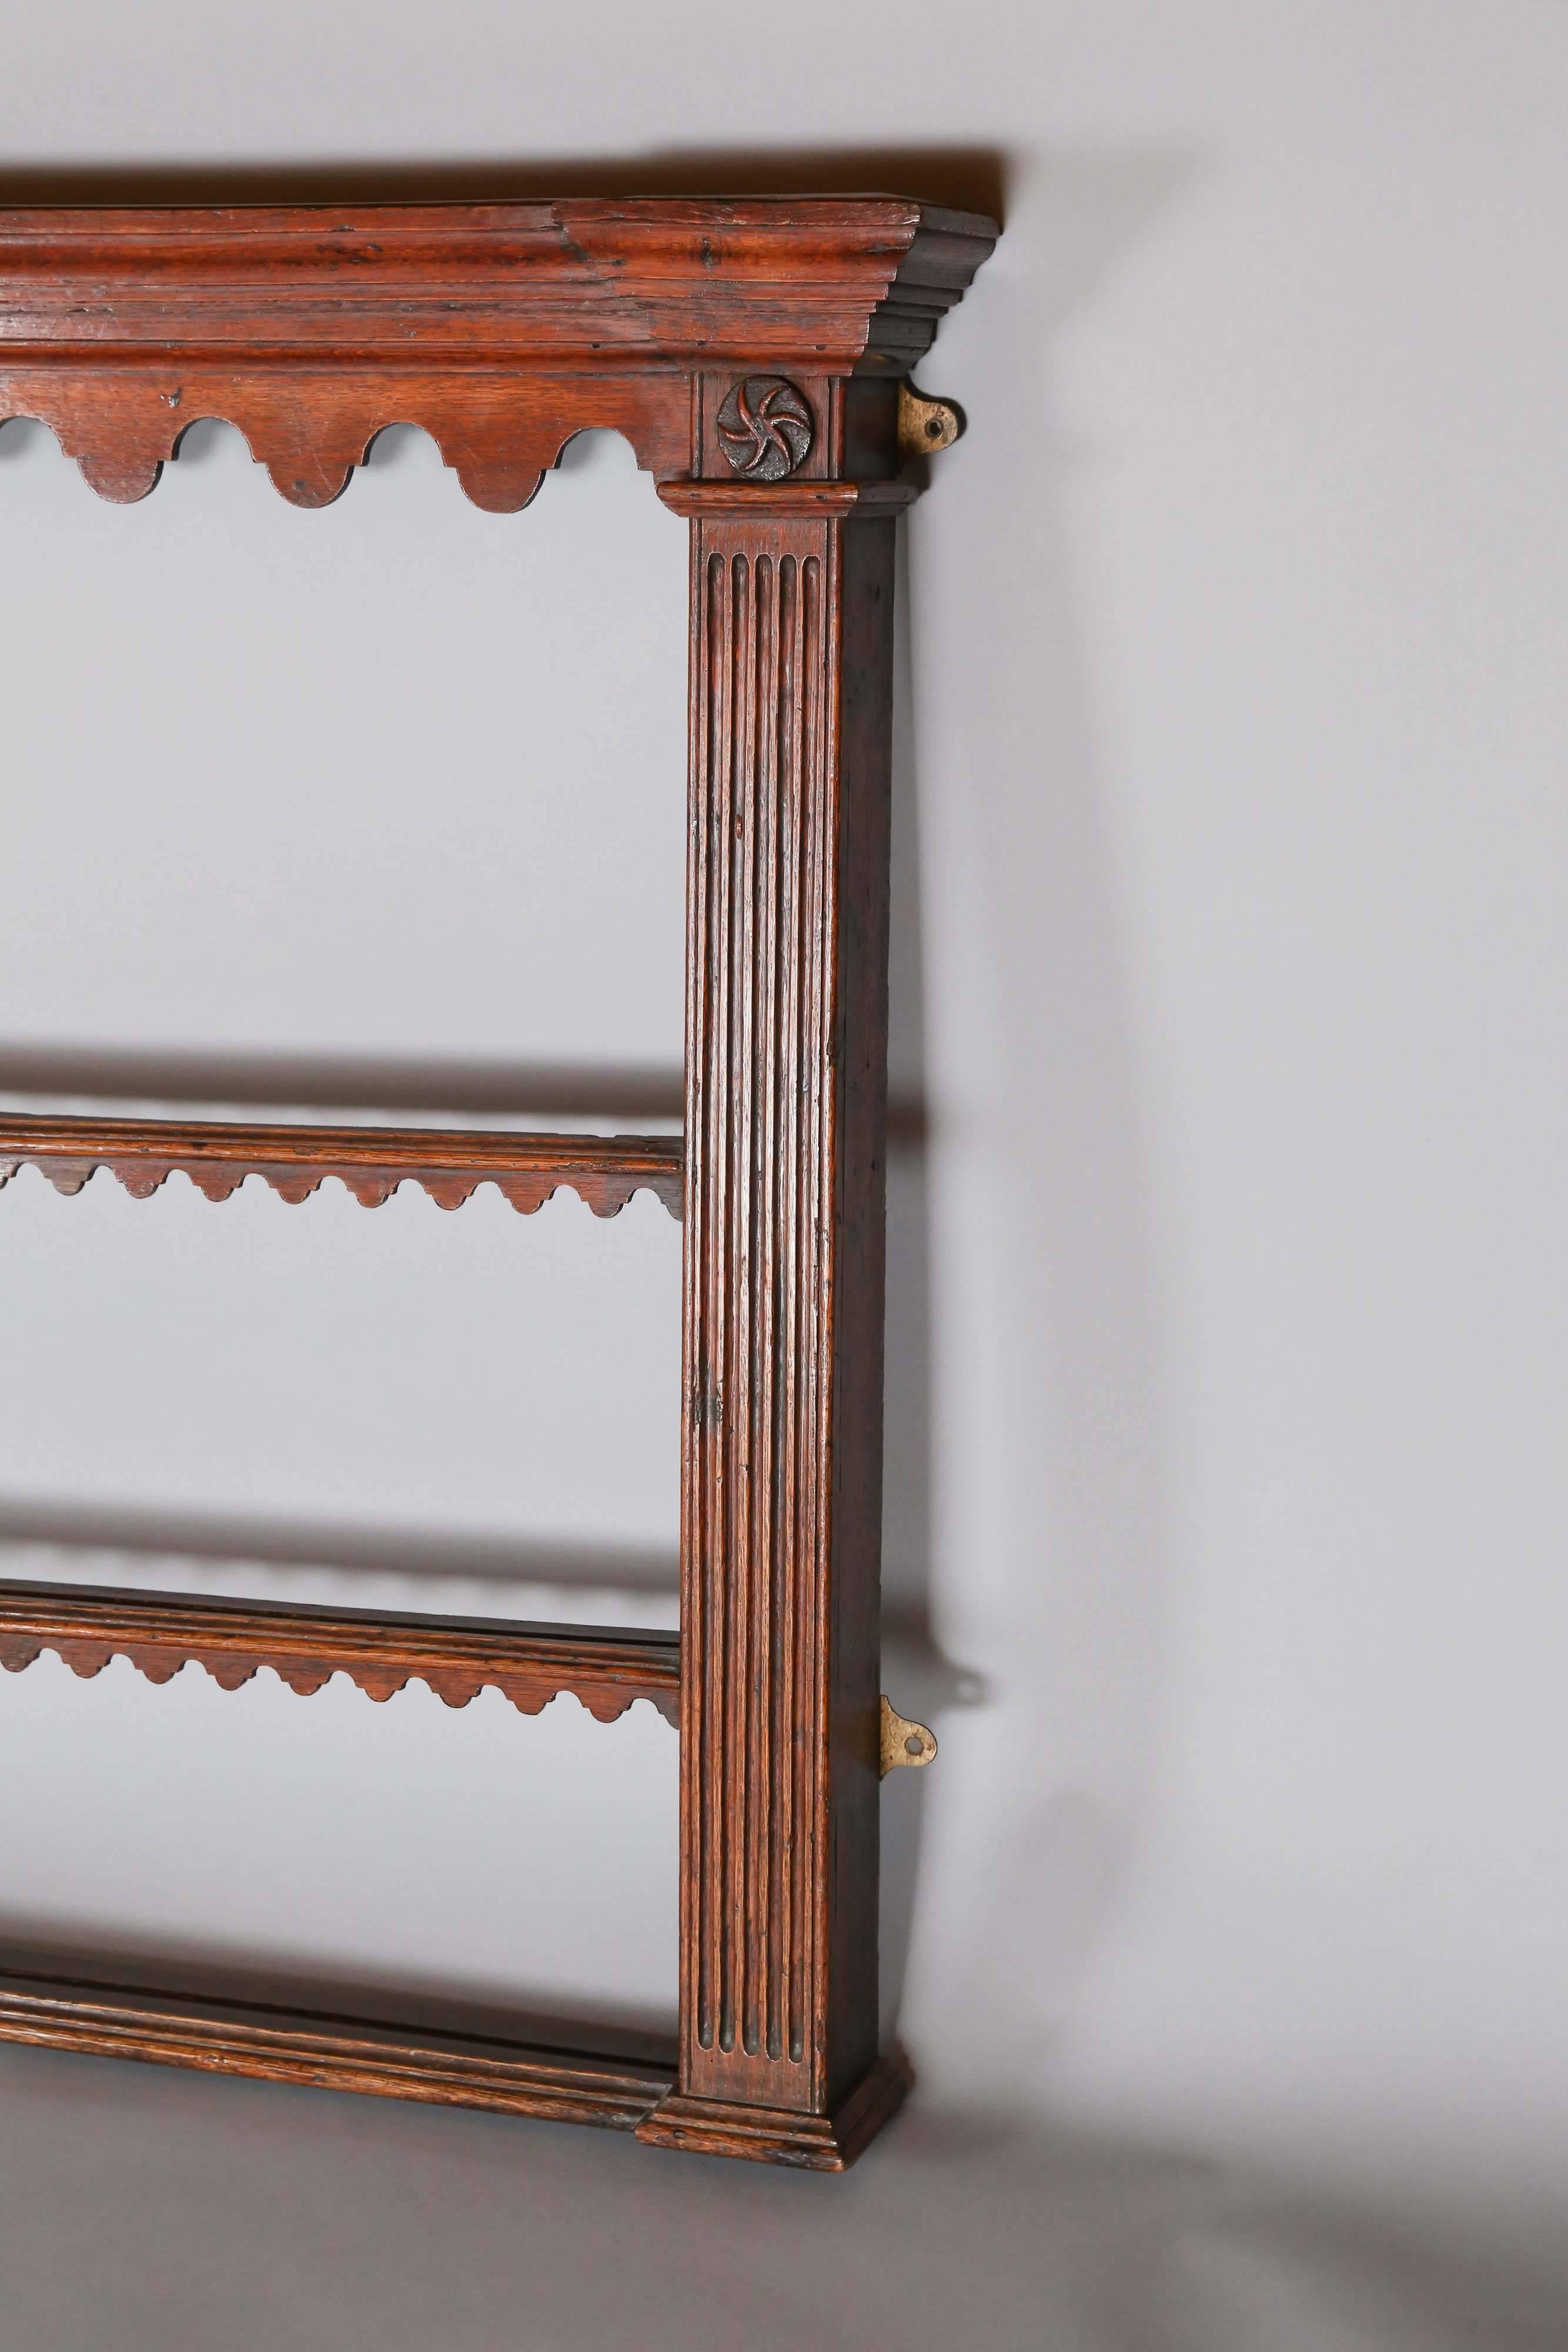 George III period oak plate rack with wonderful scalloped detail, applied carved roundels above fluted pilasters on each end.